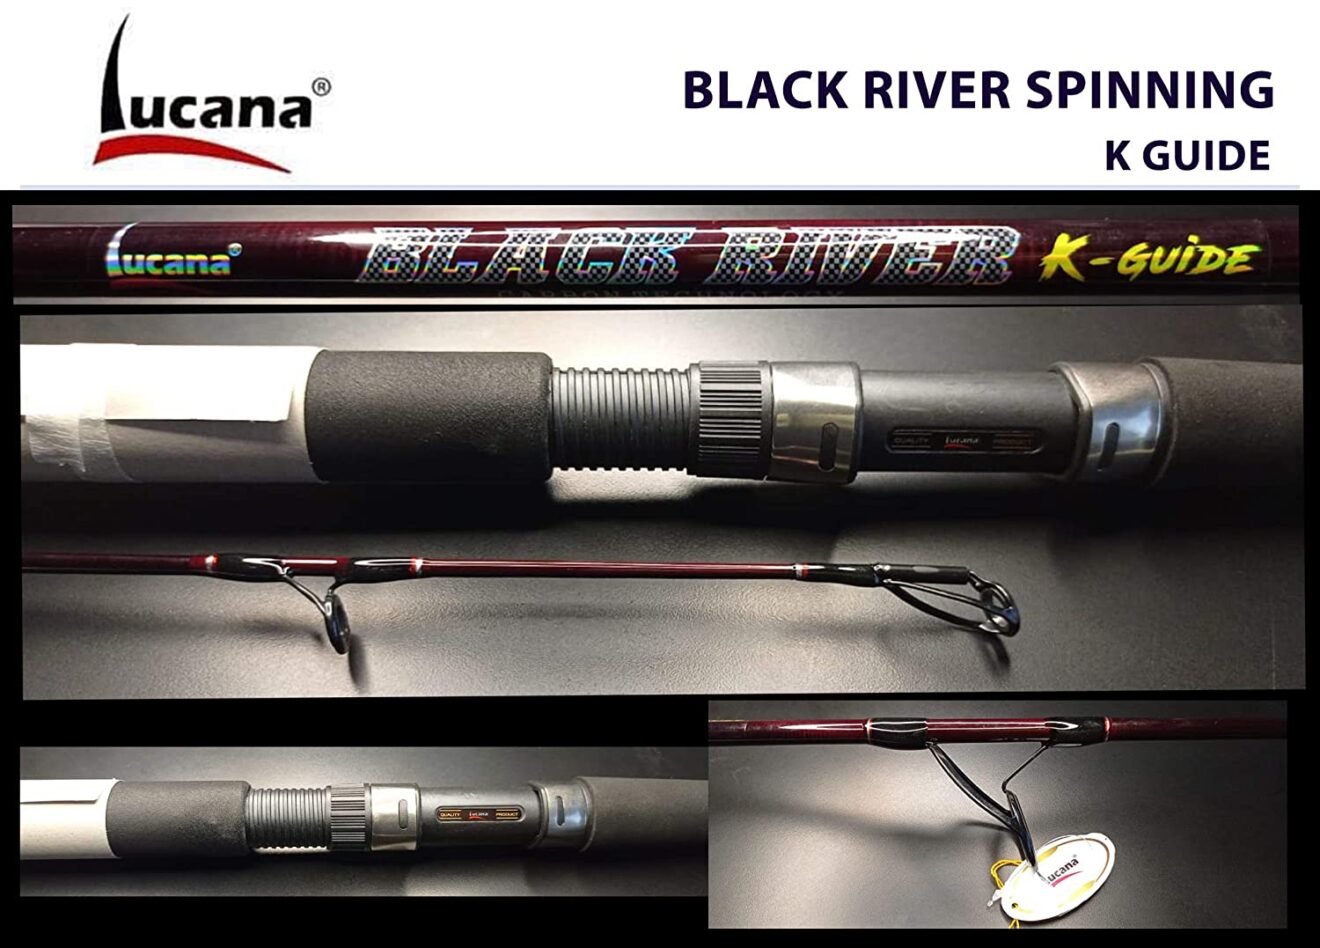 LUCANA BLACK RIVER 10FT SPINNING ROD M.R.P - ₹2,600/- Model No. - 300XHS  Length - 10ft Pieces - 2 Weight - 390gm Casting Weight - 8